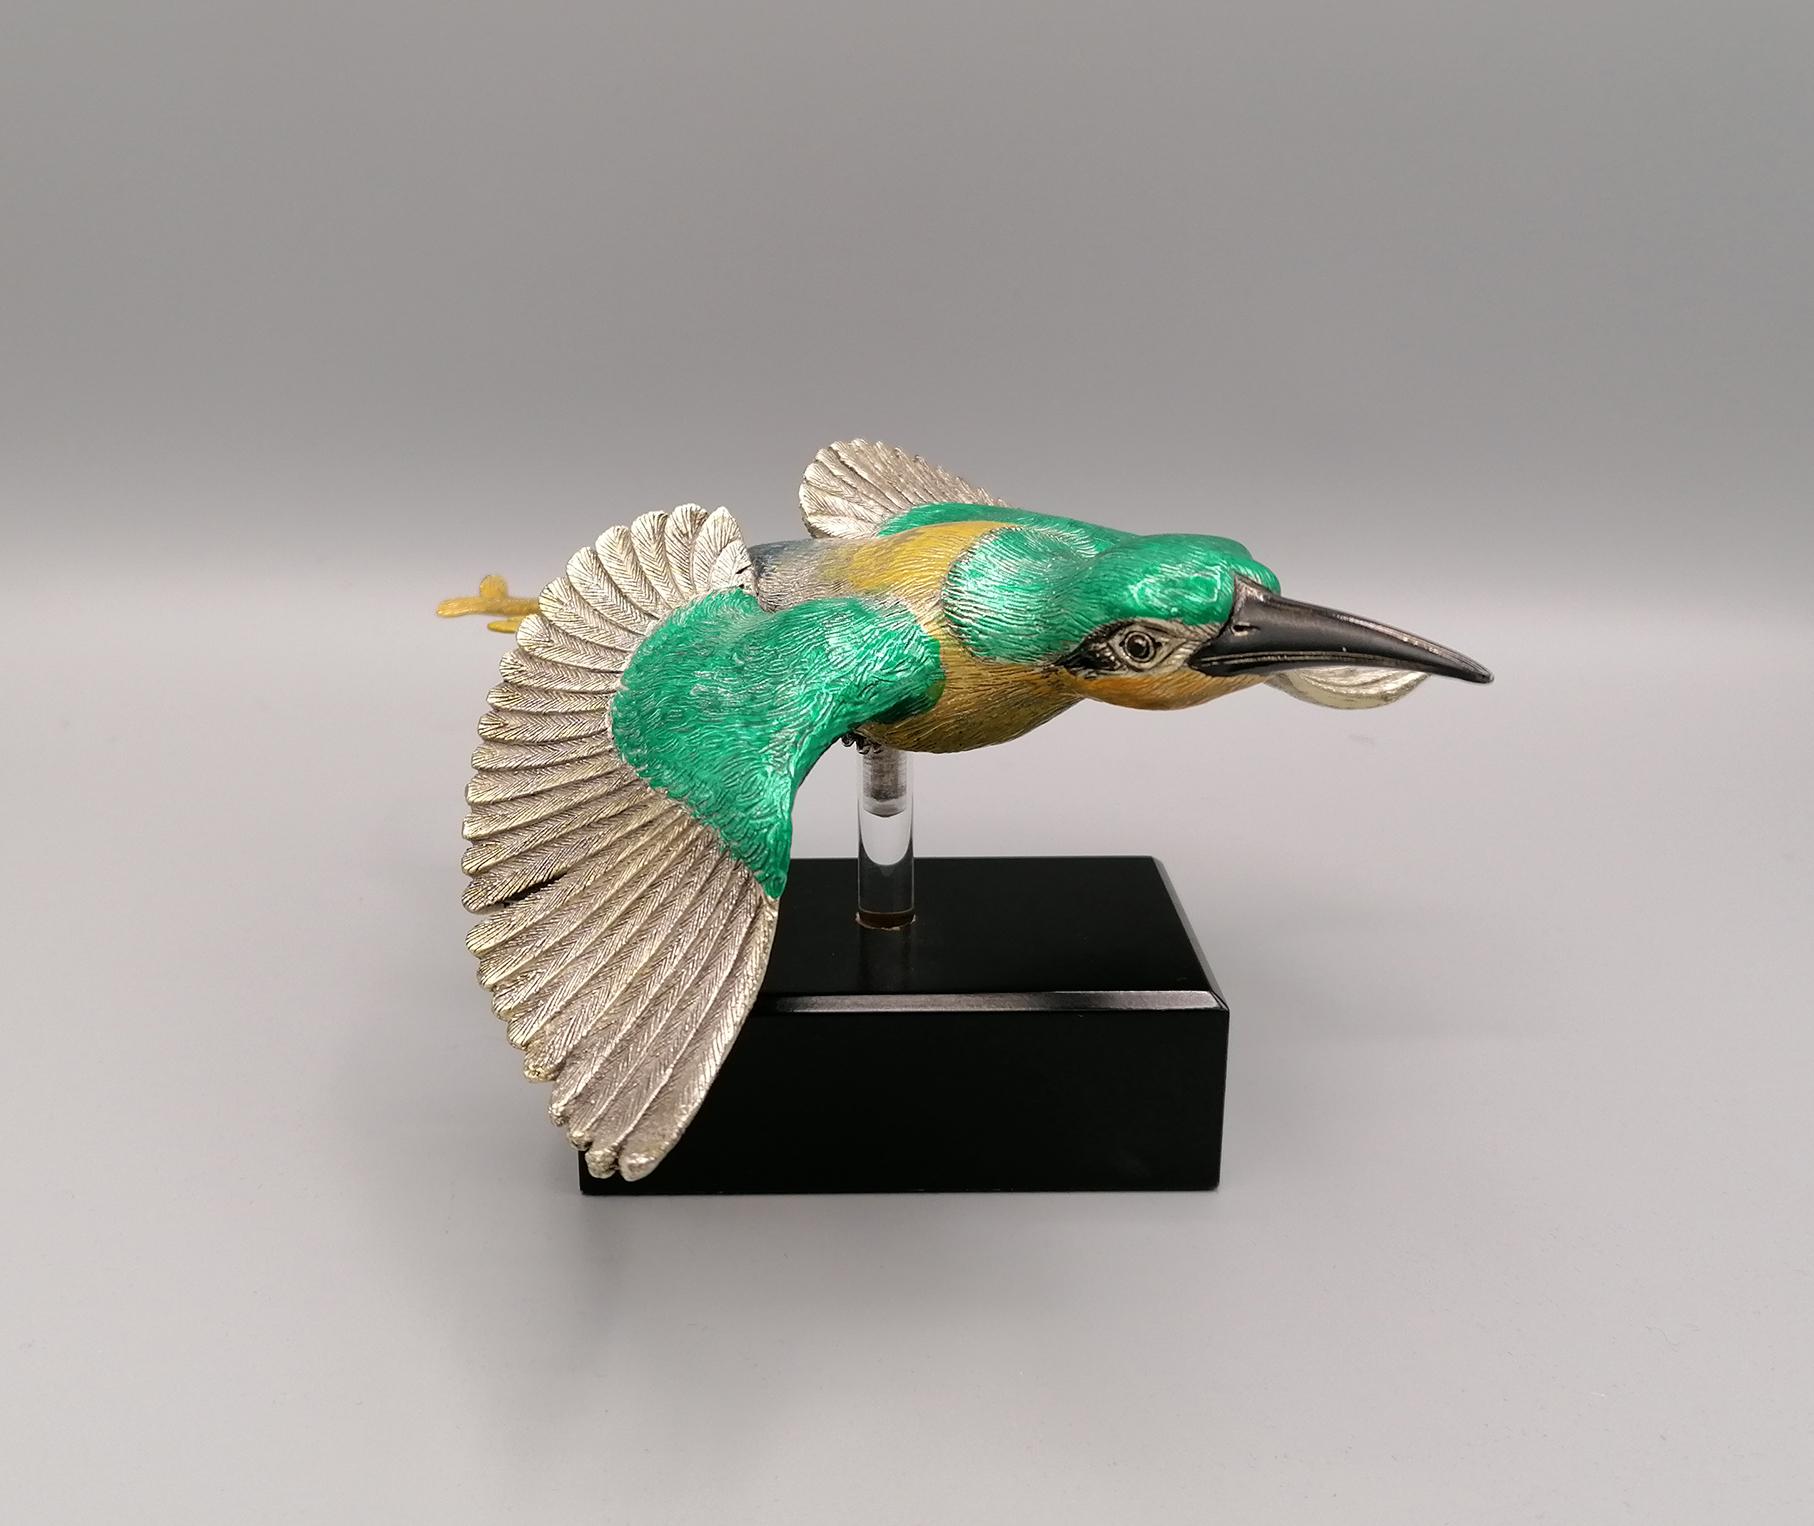 Resin sculpture depicting the Bee-Eater covered in pure 999 silver. Made by the Etruria silver factory in Florence at the end of the 20th century.
The finish is hand-enameled in green, yellow, silver and black.
The sculpture is placed on a